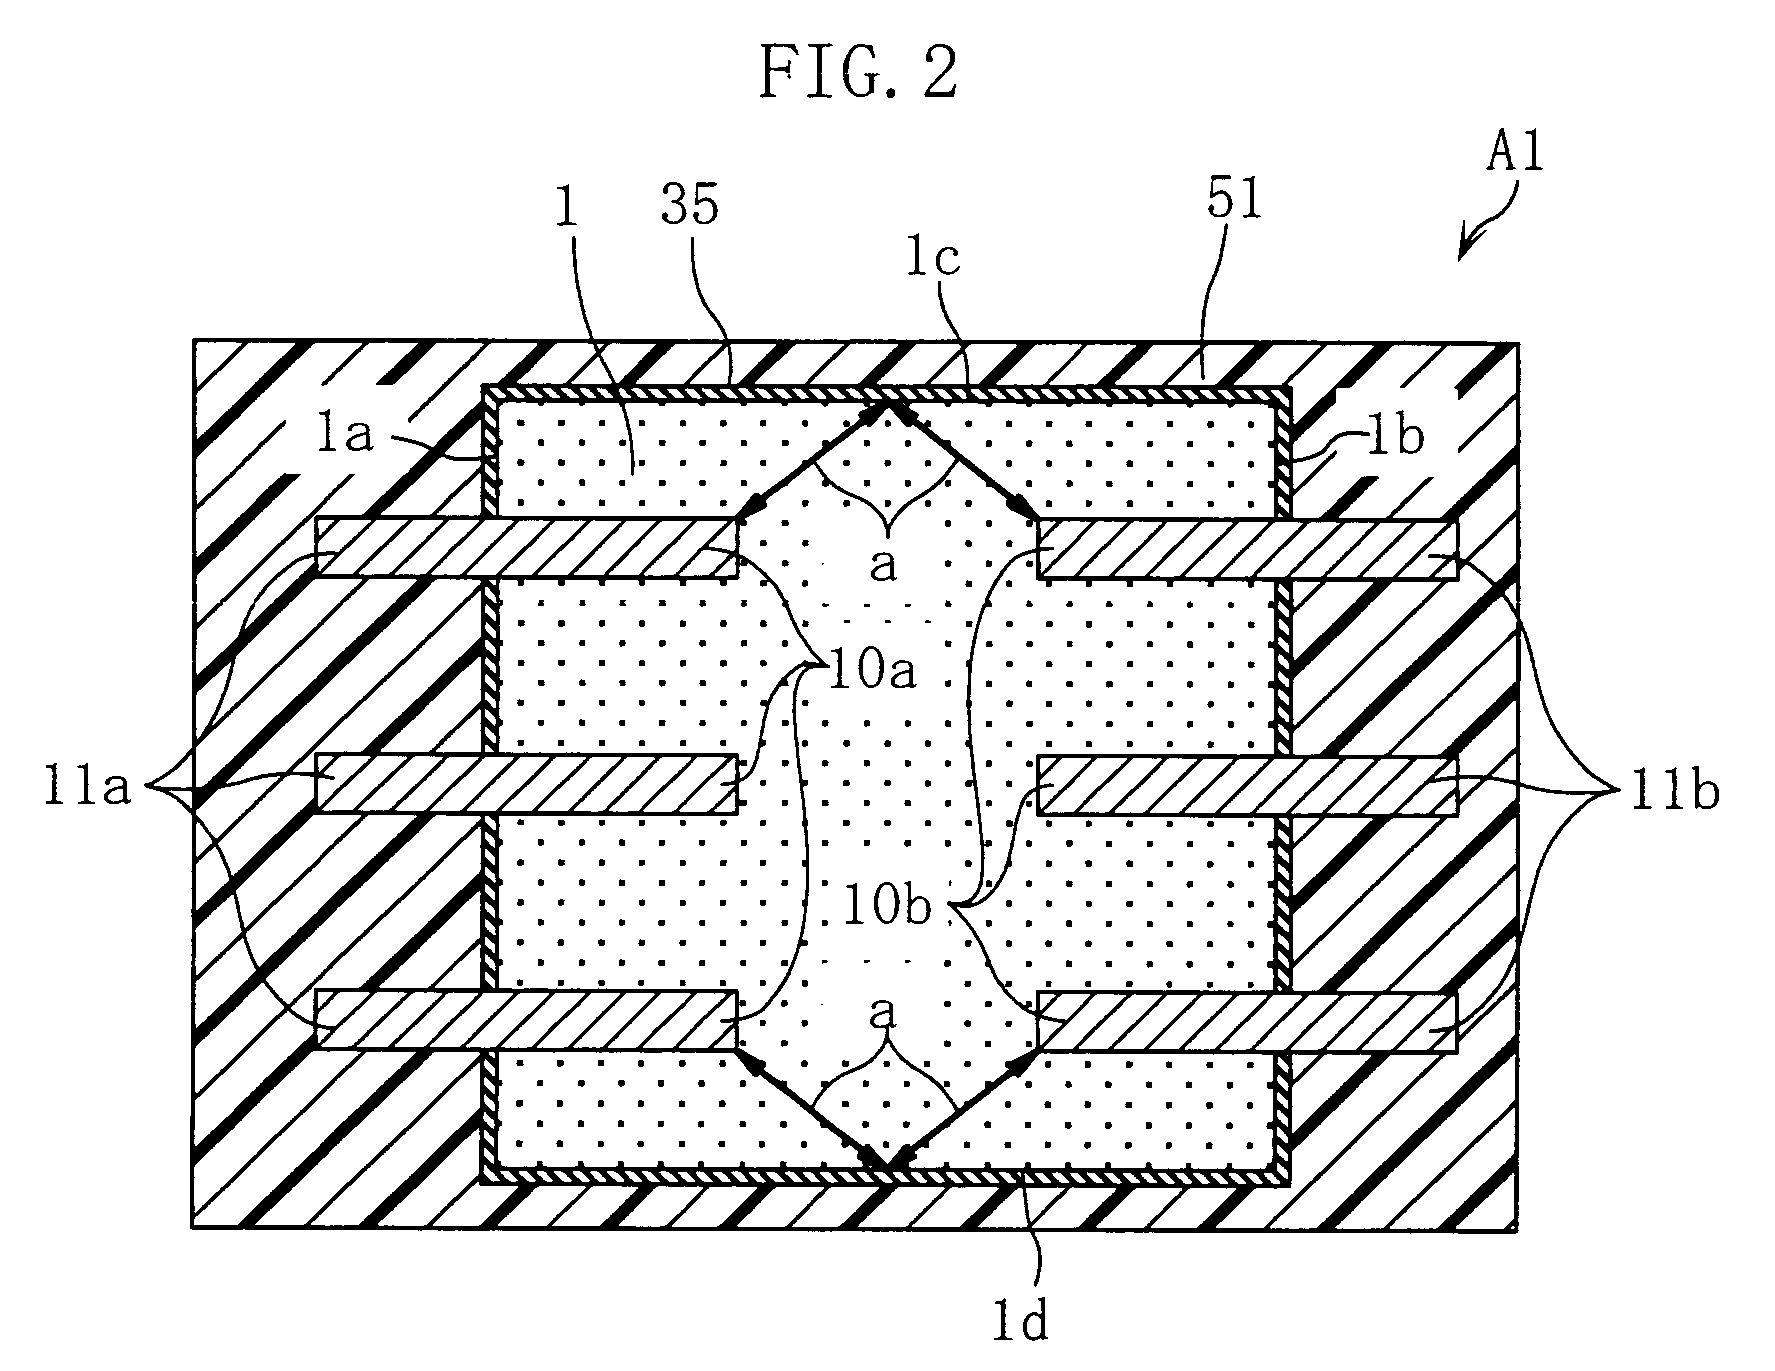 Solid electrolytic capacitor with first and second anode wires